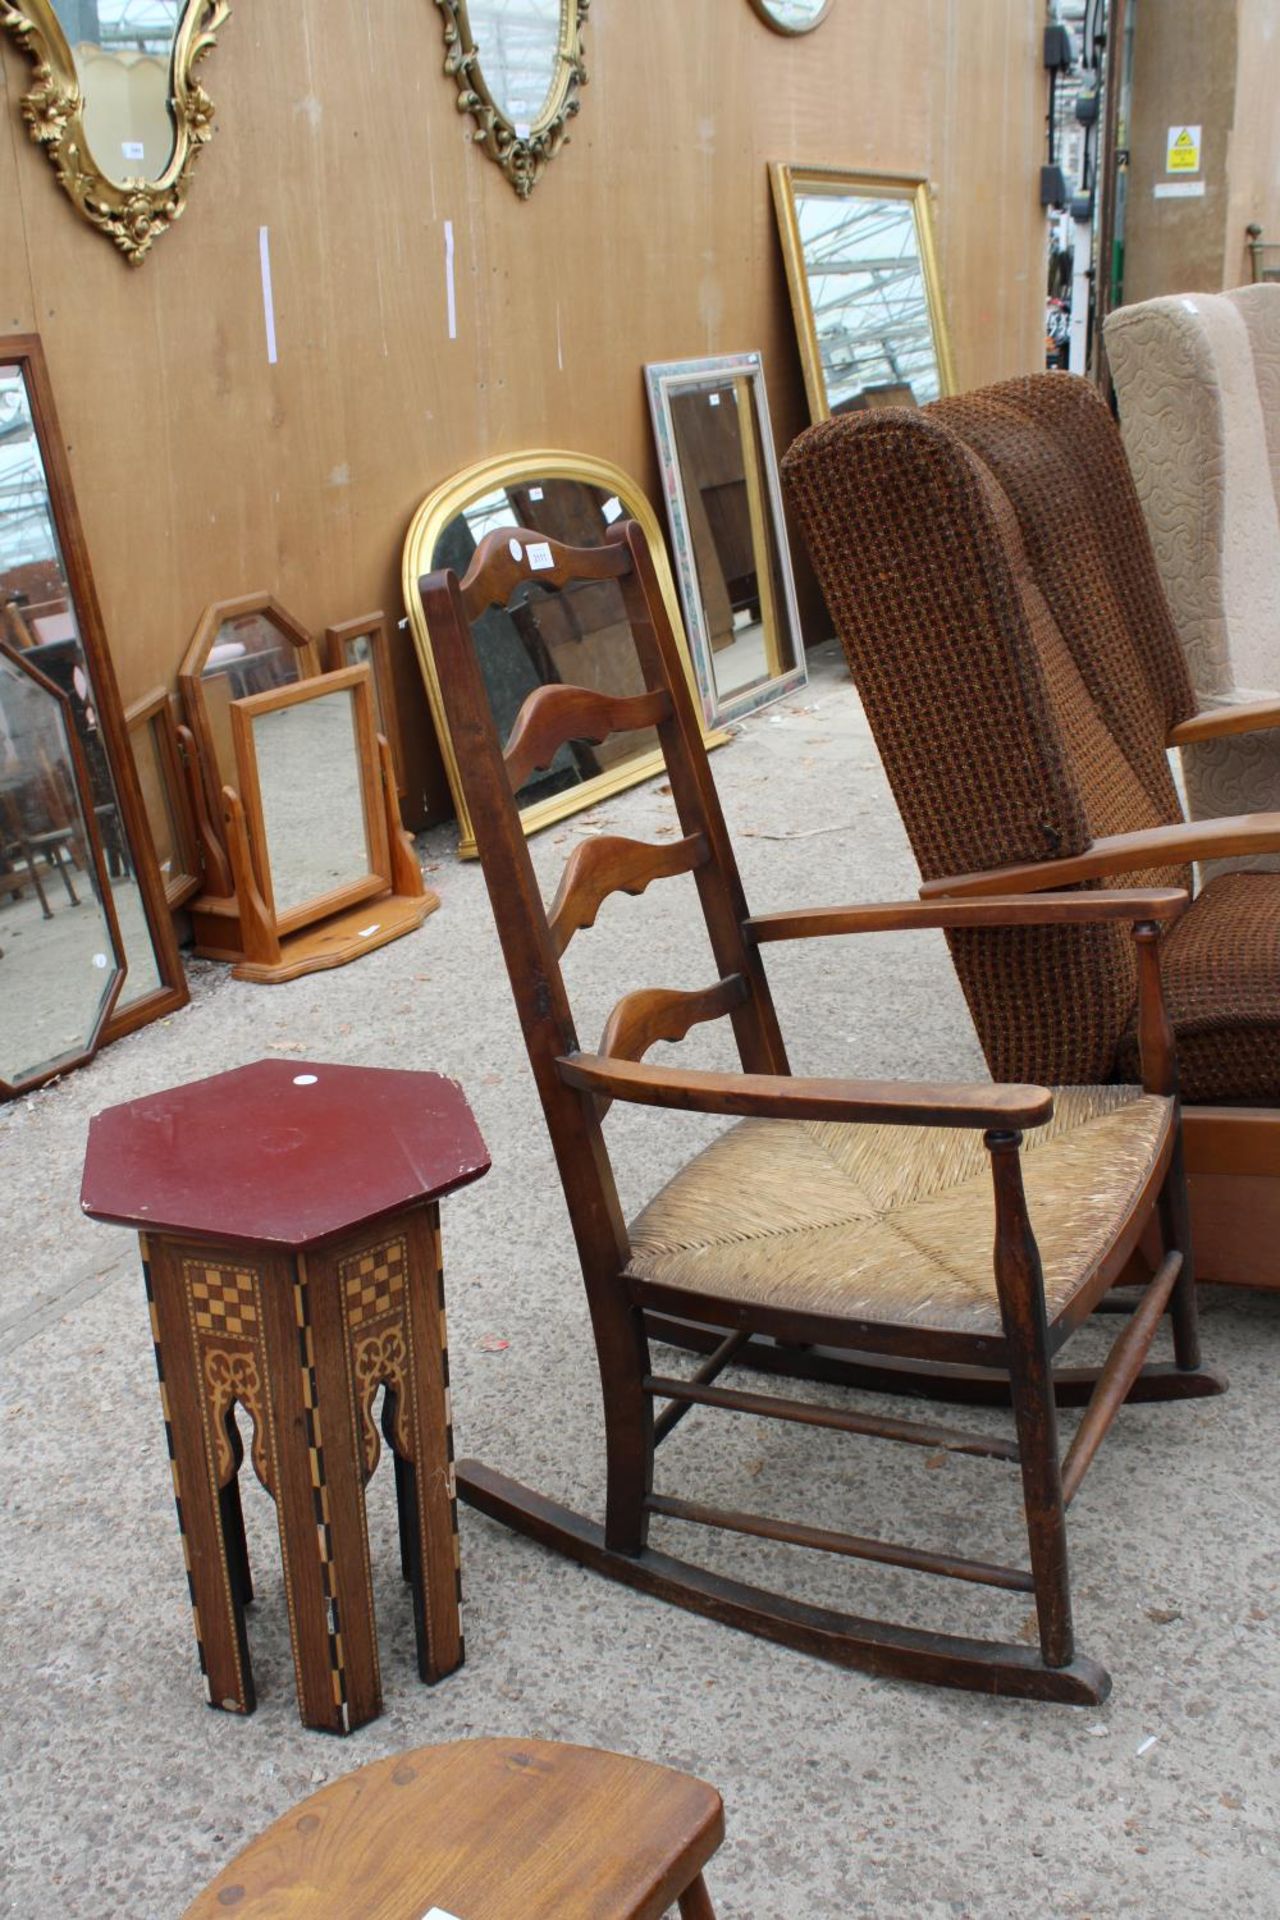 A BEECH FRAMED LADDER BACK ROCKING CHAIR AND A MOORISH STYLE HEXAGONAL TABLE - Image 3 of 3